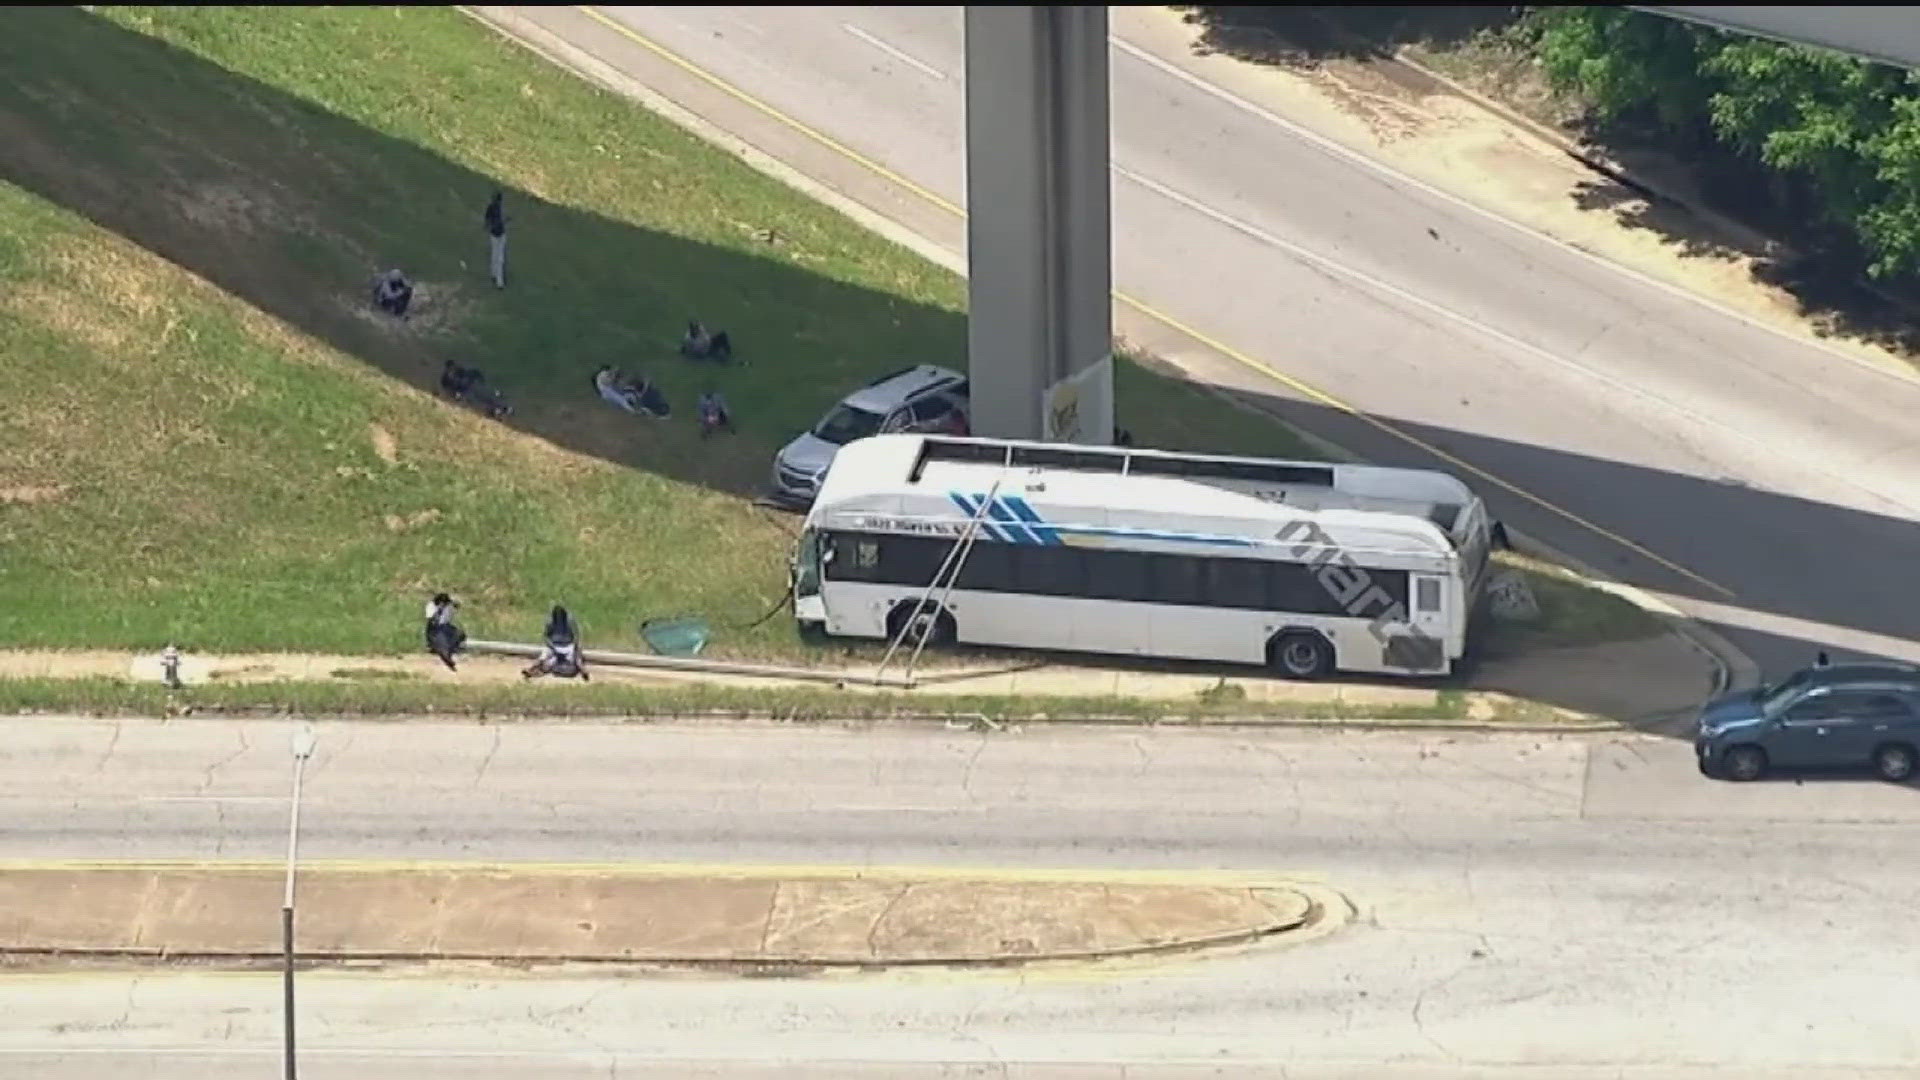 Authorities said the accident happened at Ted Turner and Whitehall Street, which is near the MARTA Garnett Station.